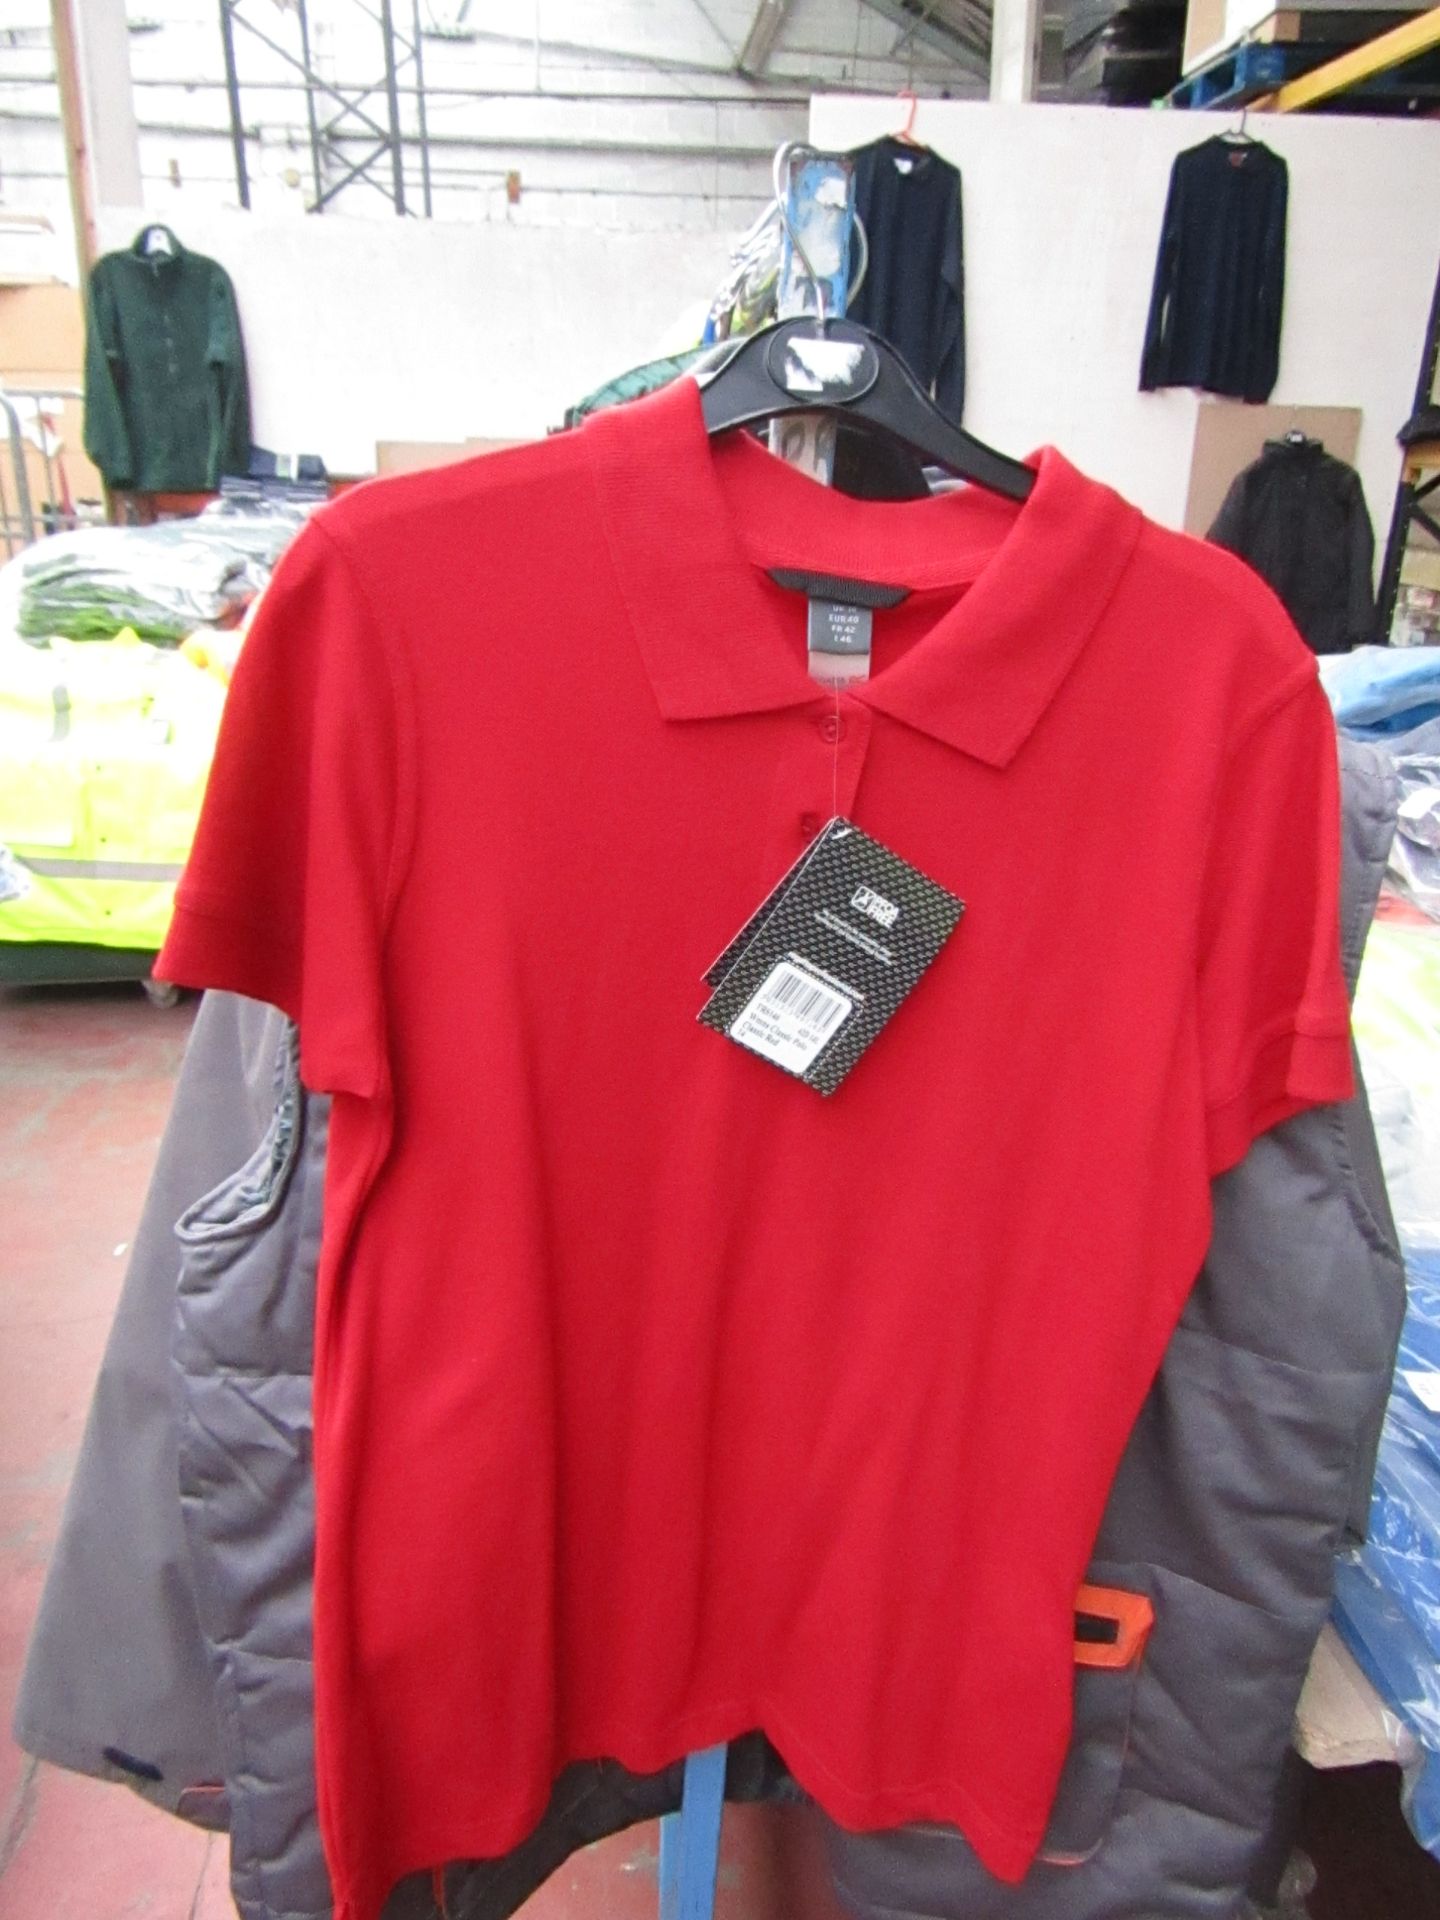 2x Ladies Regatta Red Polo Shirt, Size 8. New in Packaging